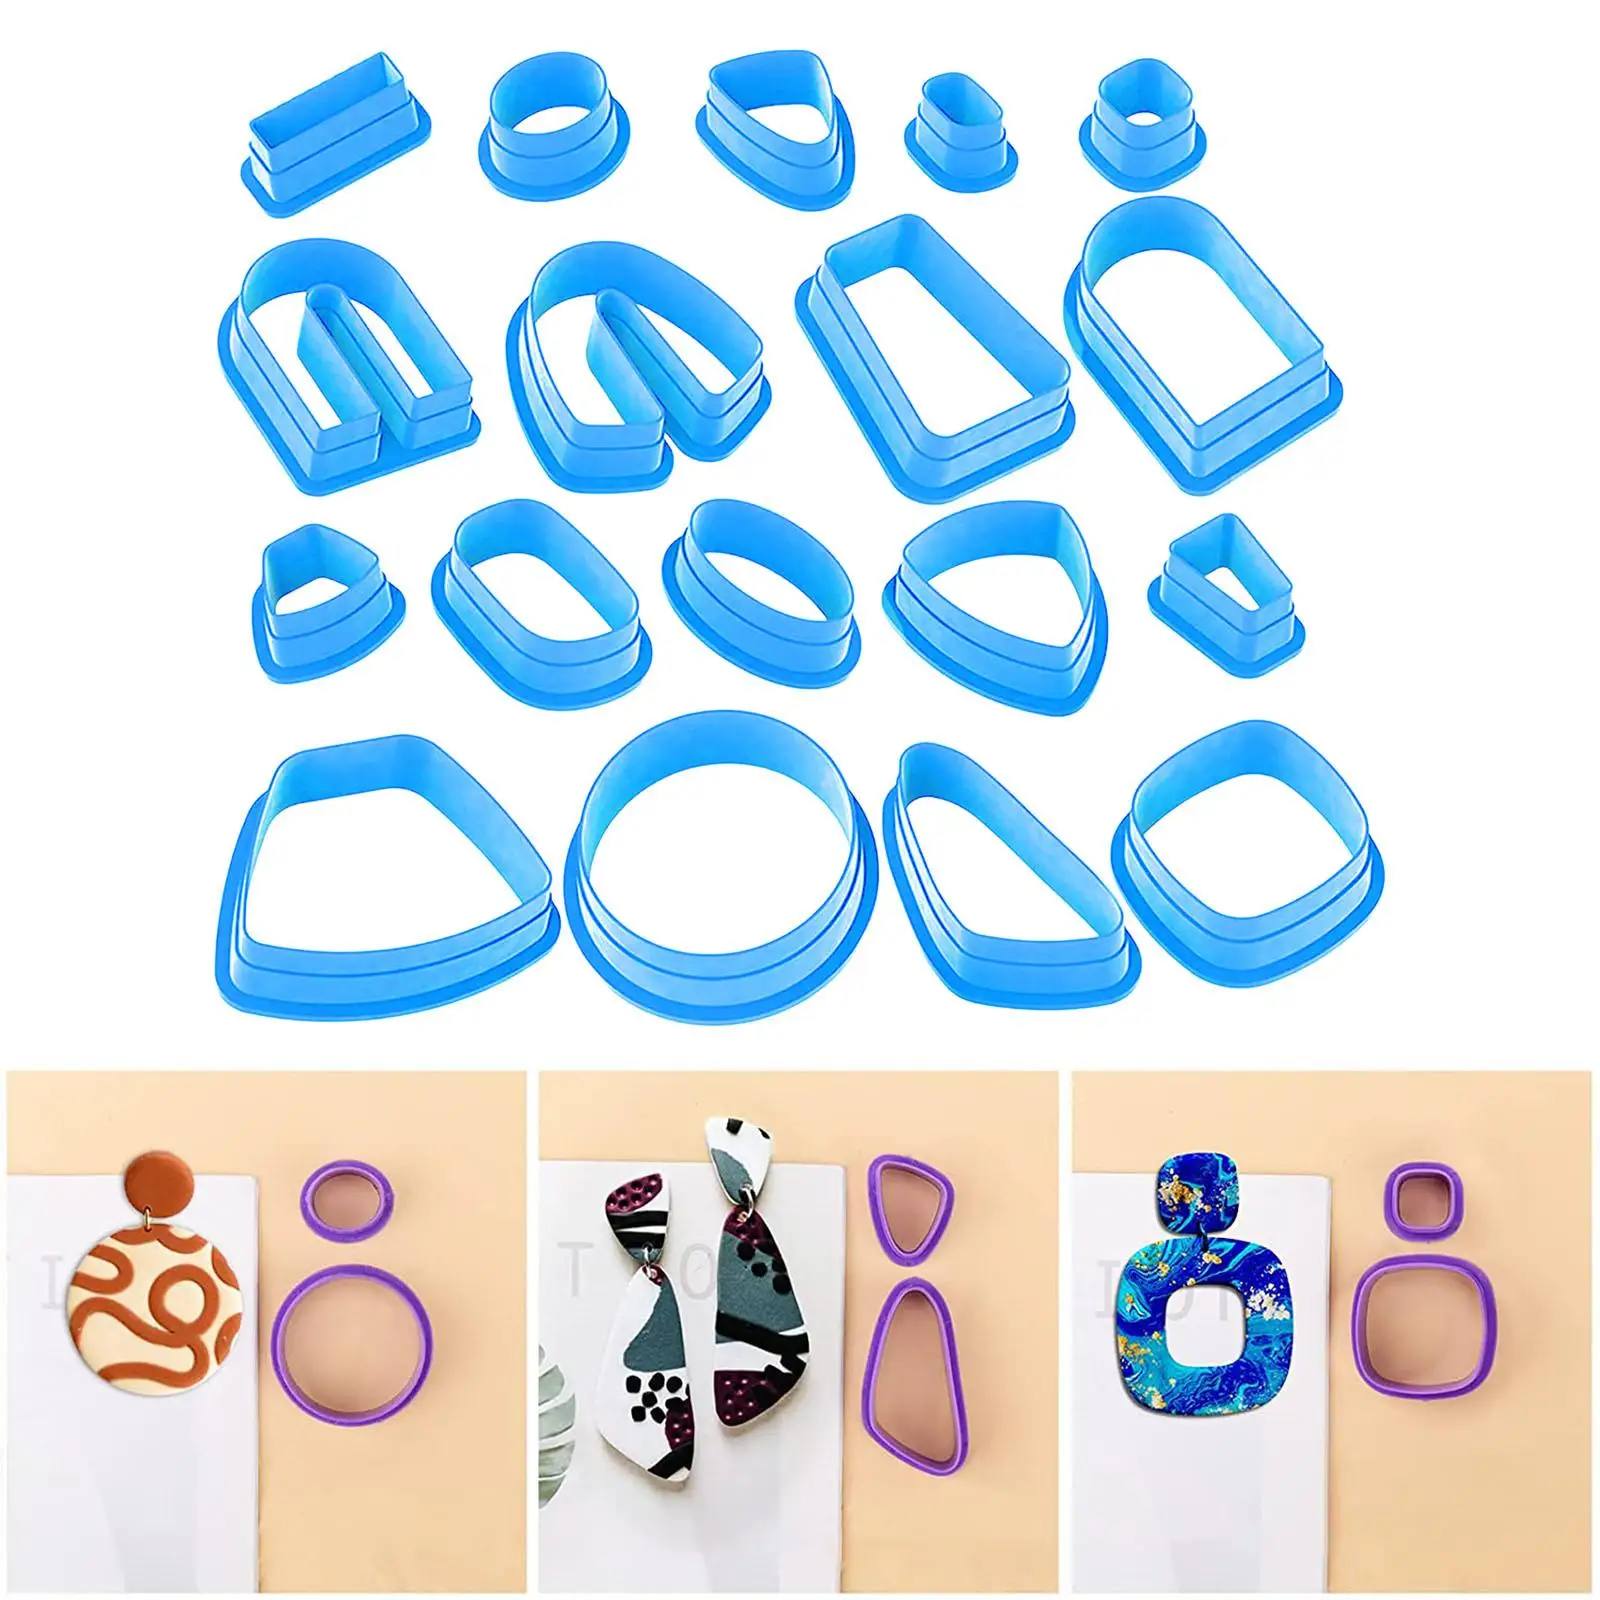 18 Pieces Plastic Polymer Clay Cutters Earring Making Kit Shapes Kids